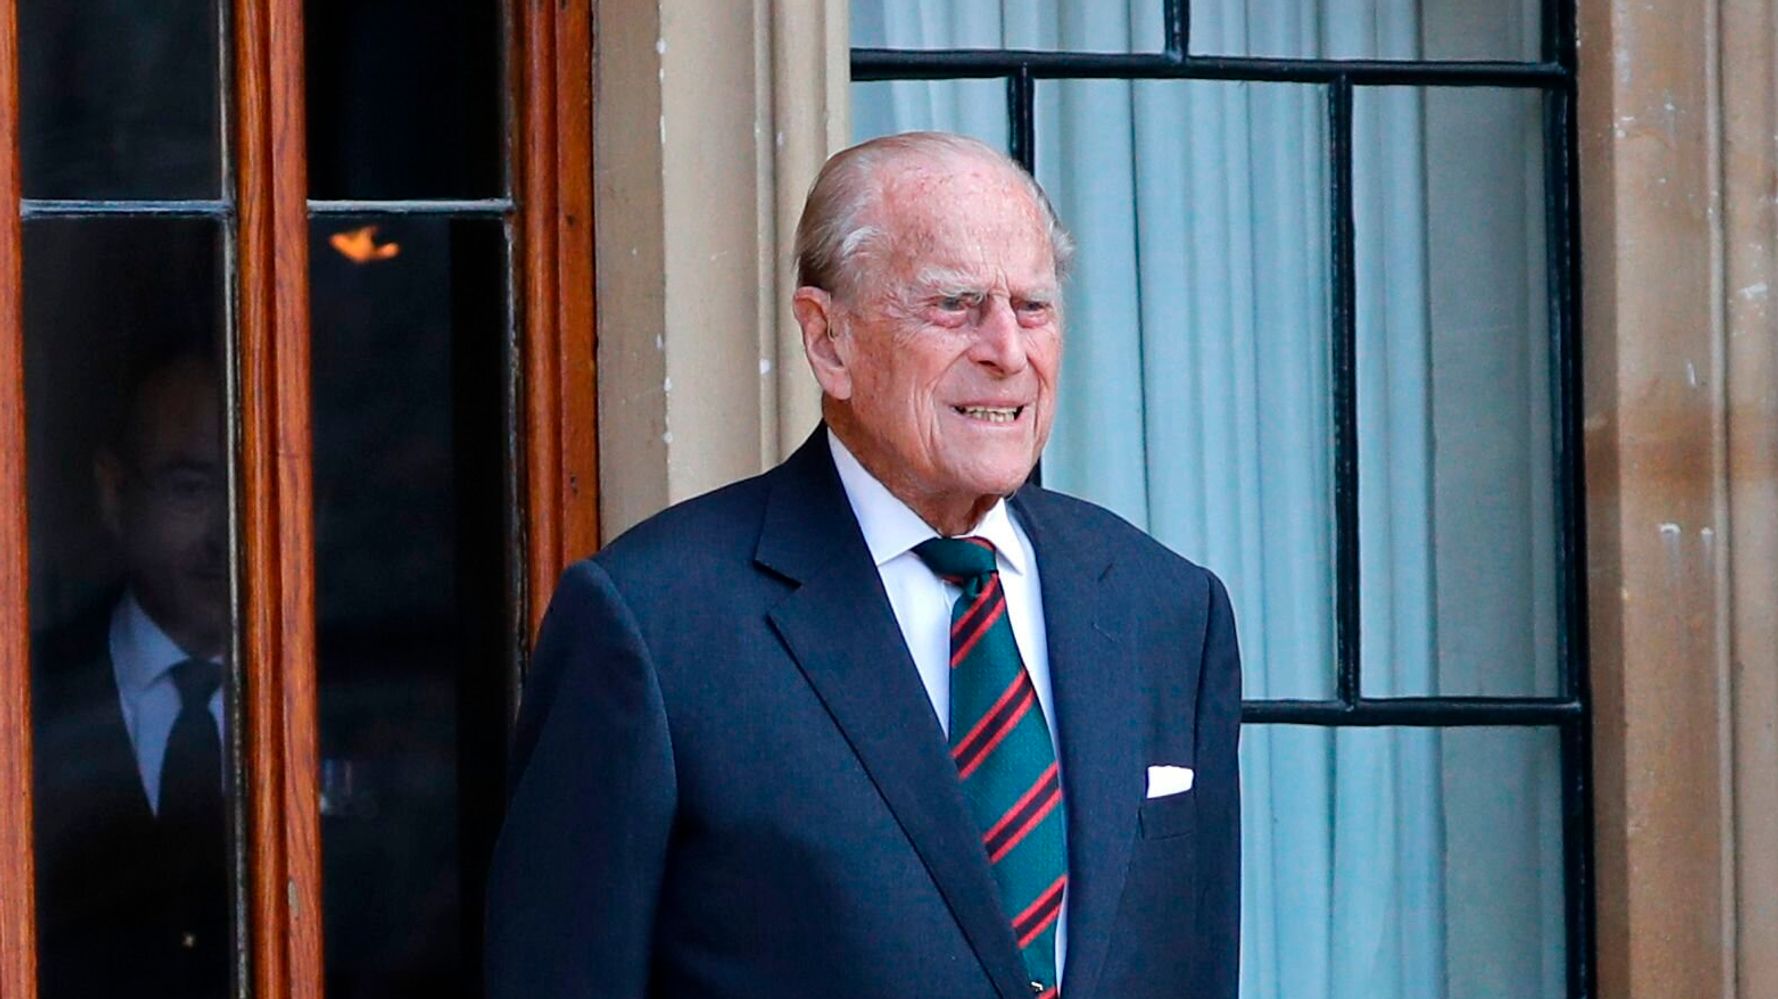 Buckingham Palace presents an update on Prince Philip’s condition